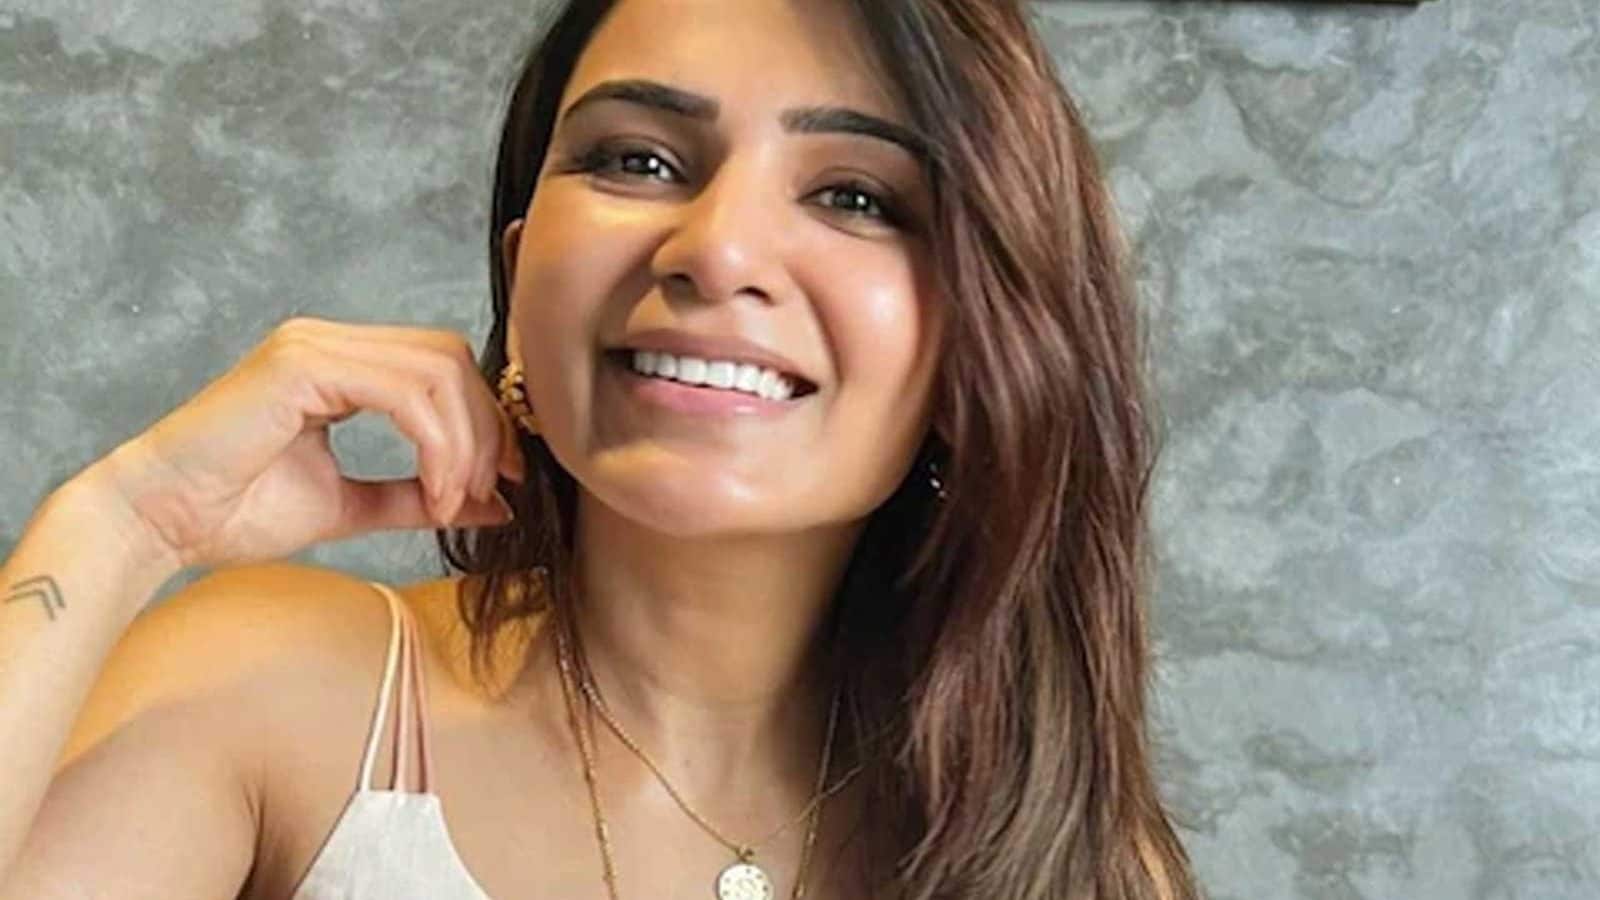 Samantha Ruth Prabhu Signs Deal With Yash Raj Films? Here's What We Know - News18